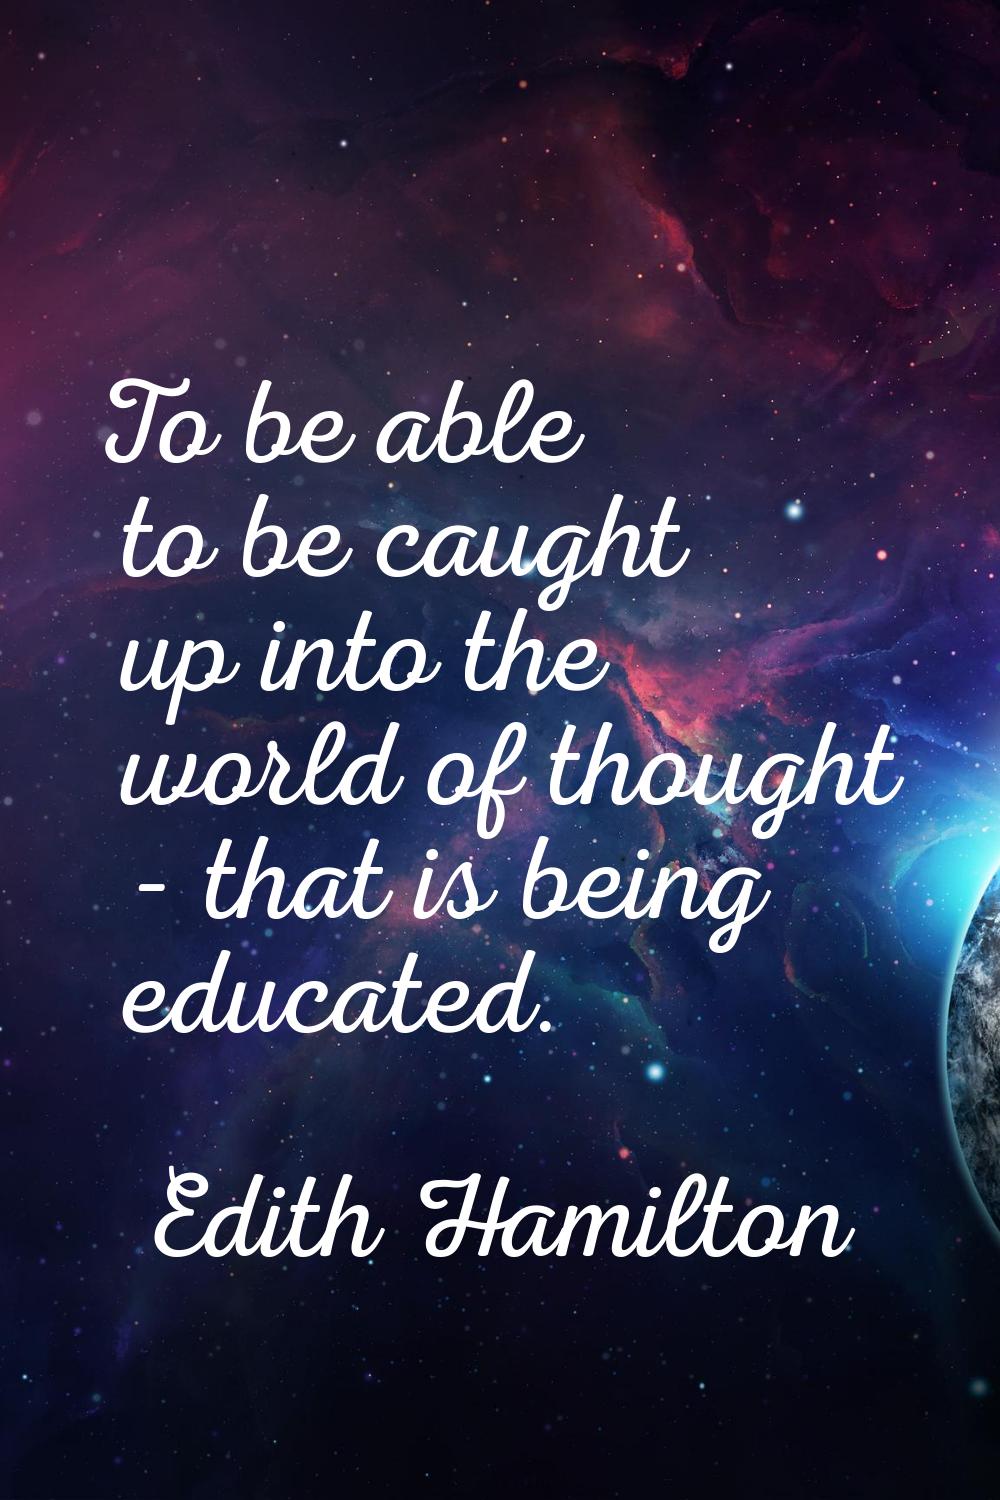 To be able to be caught up into the world of thought - that is being educated.